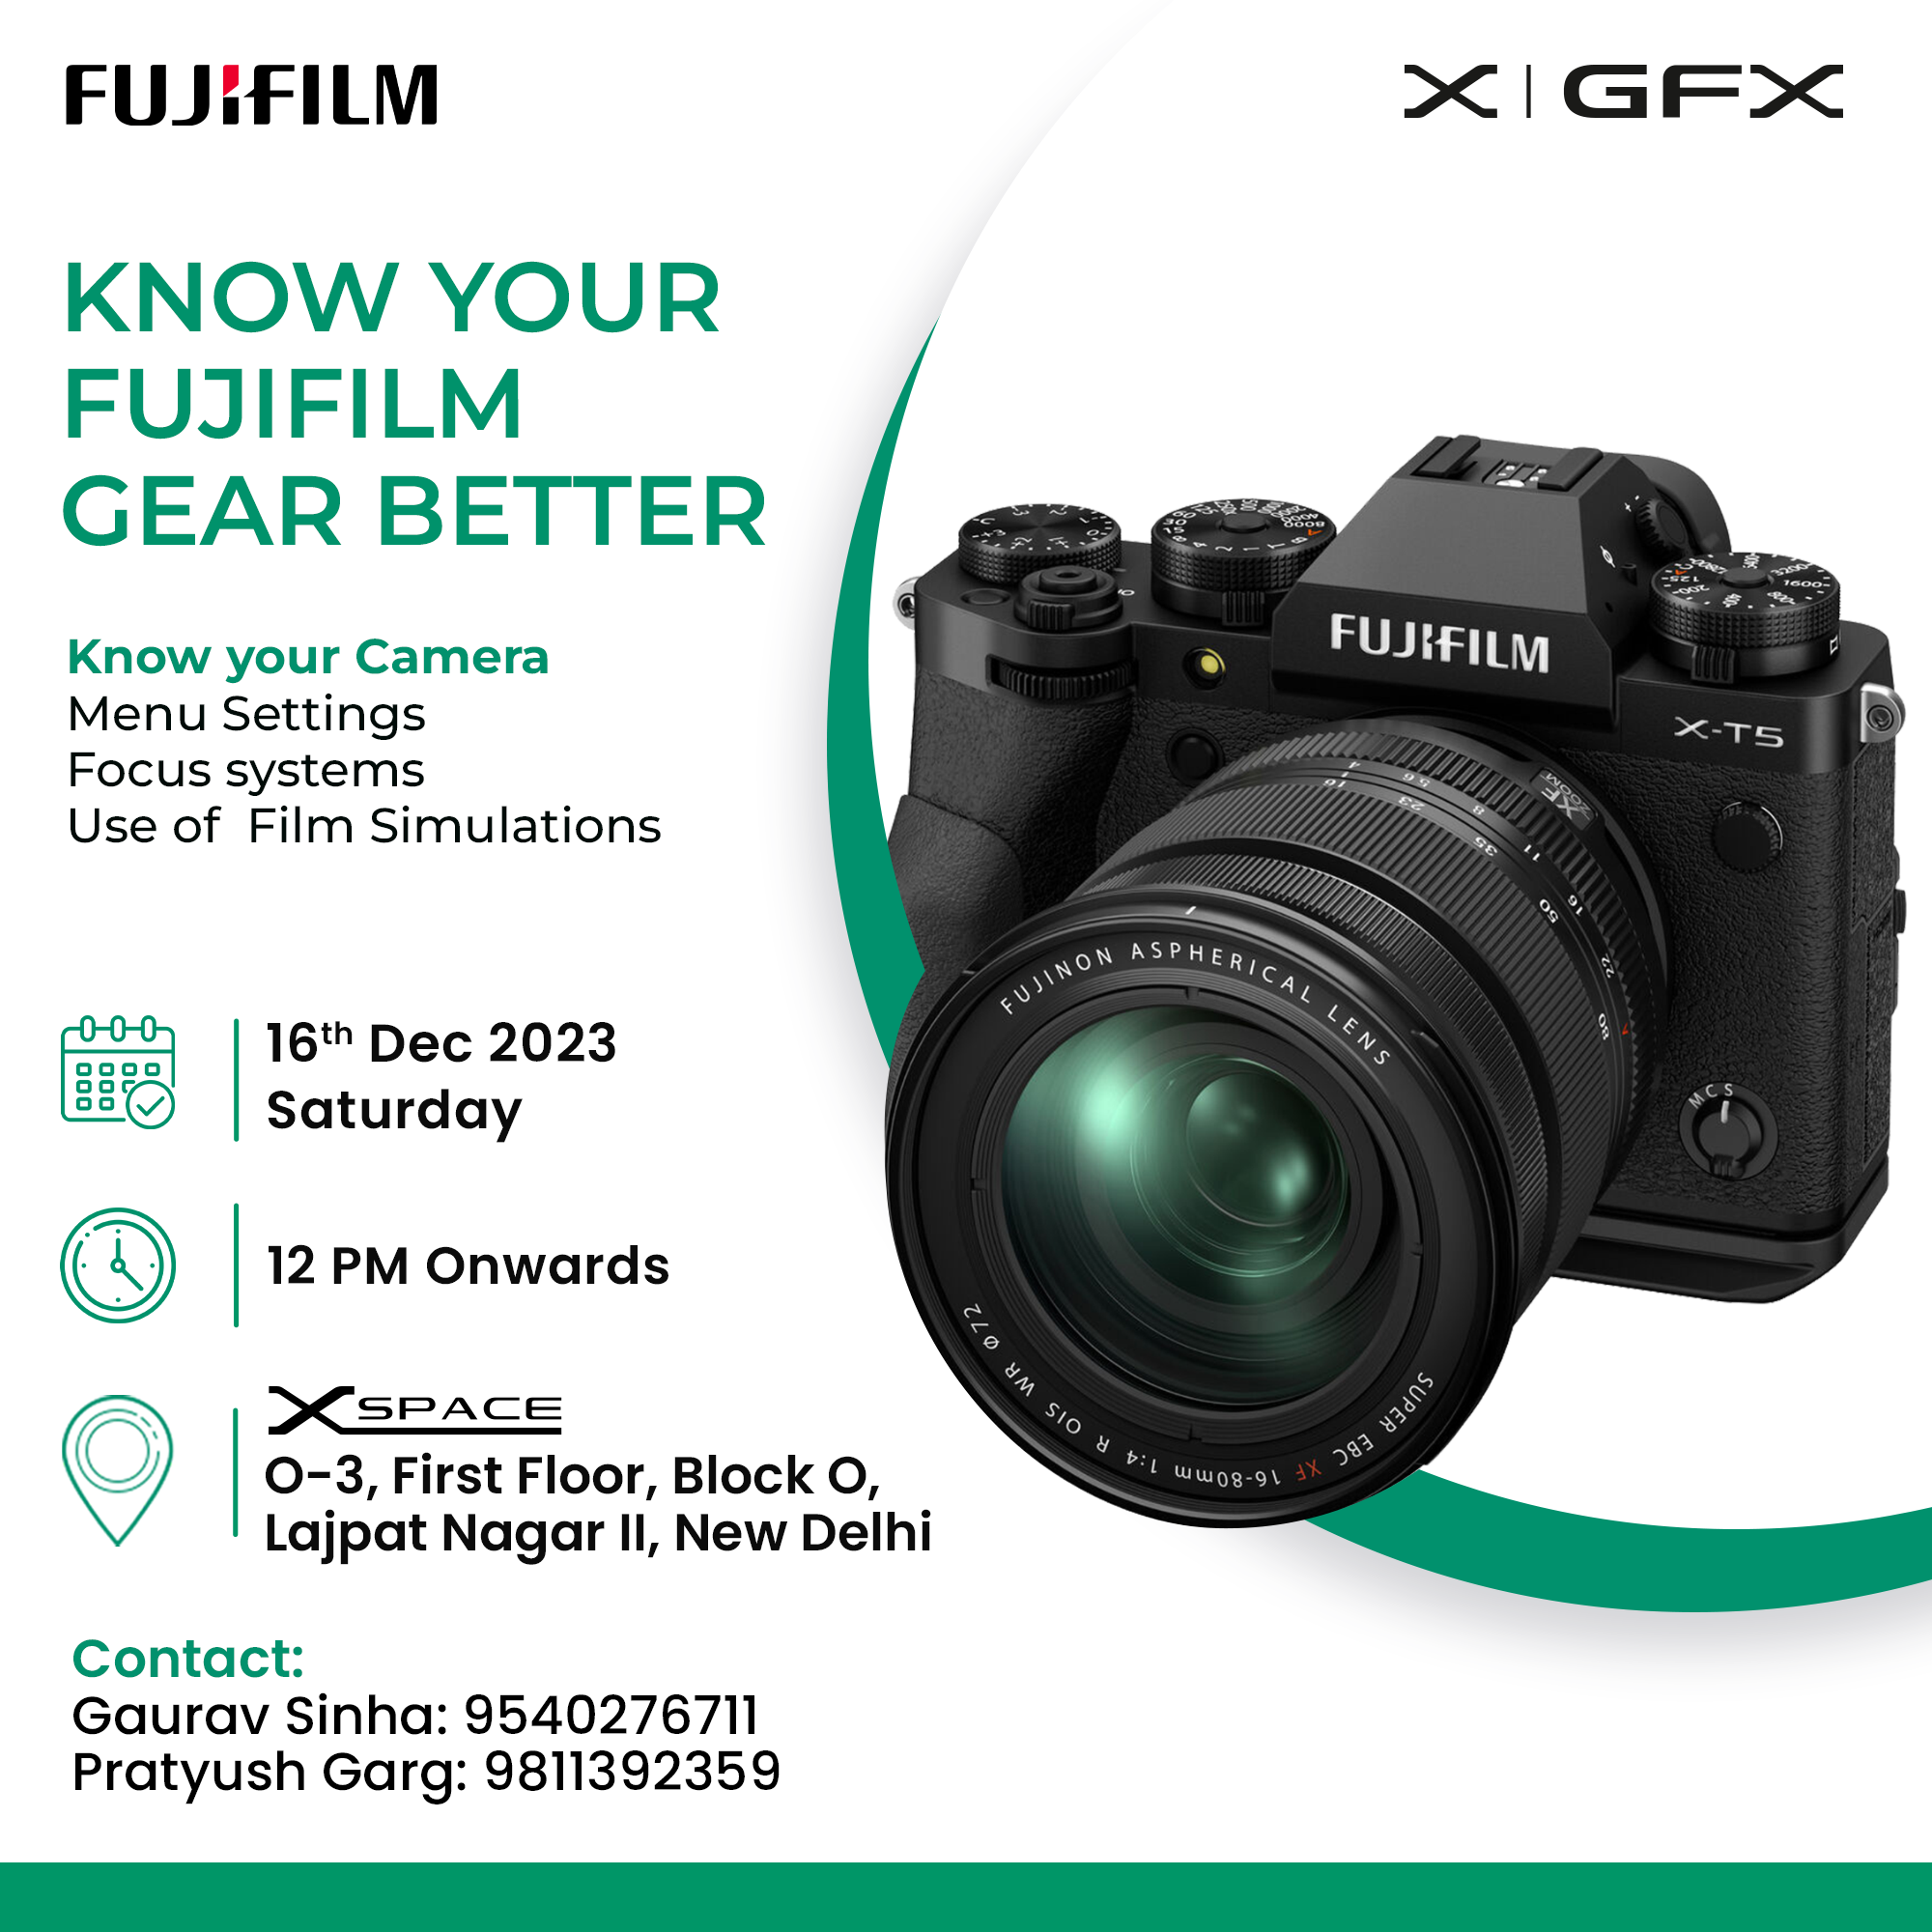 Know Your Fujifilm Gear Better